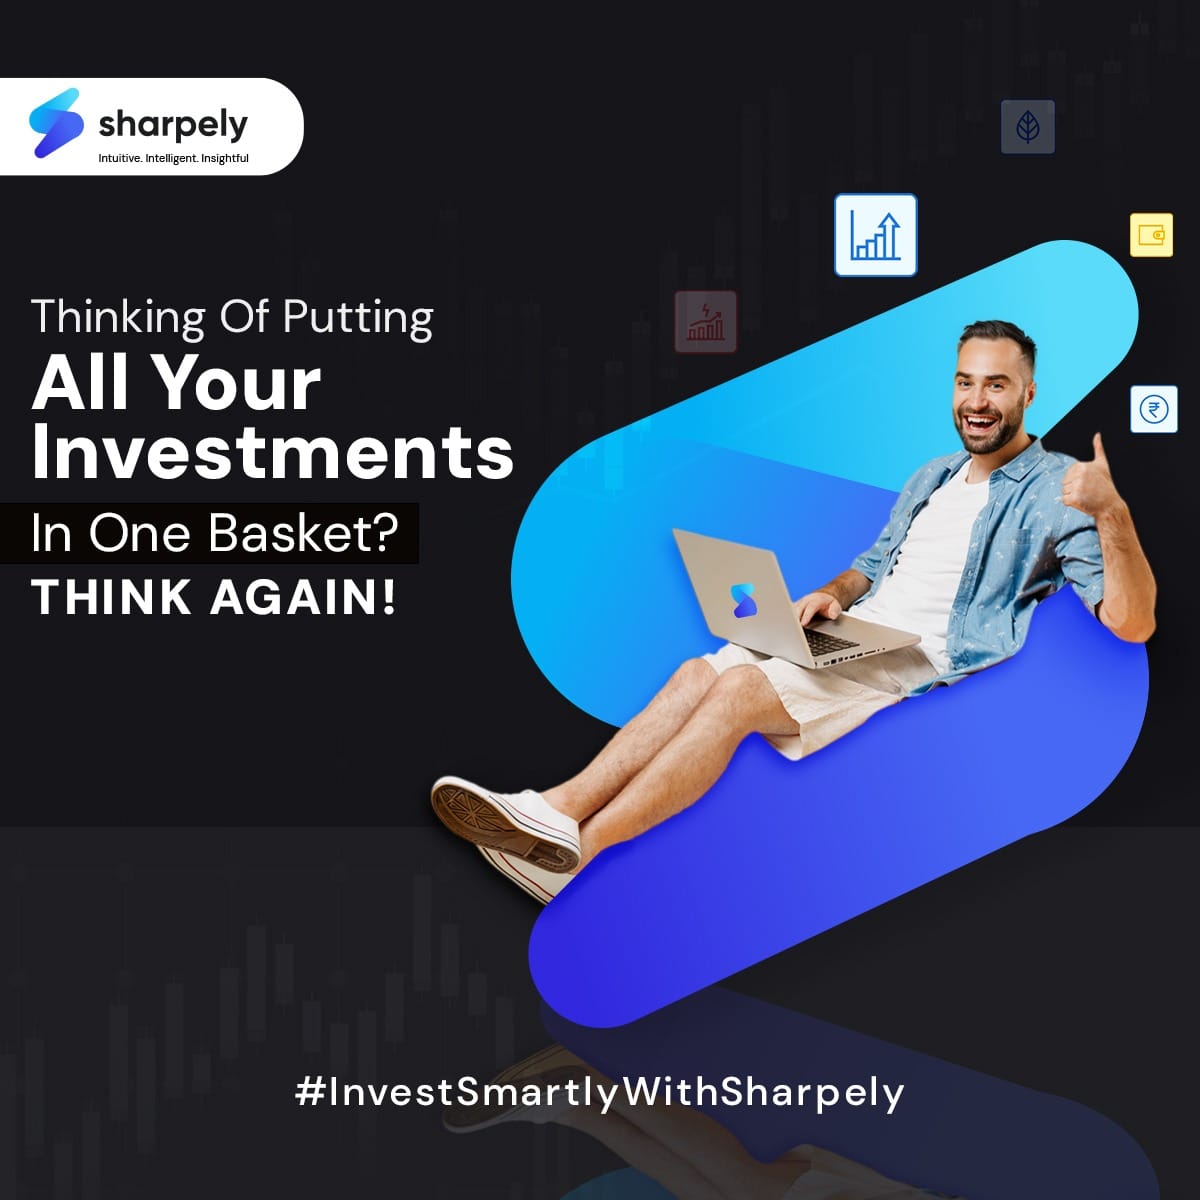 Simplify Your Choices: sharpely's Curated Mutual Fund Baskets for Every Investor